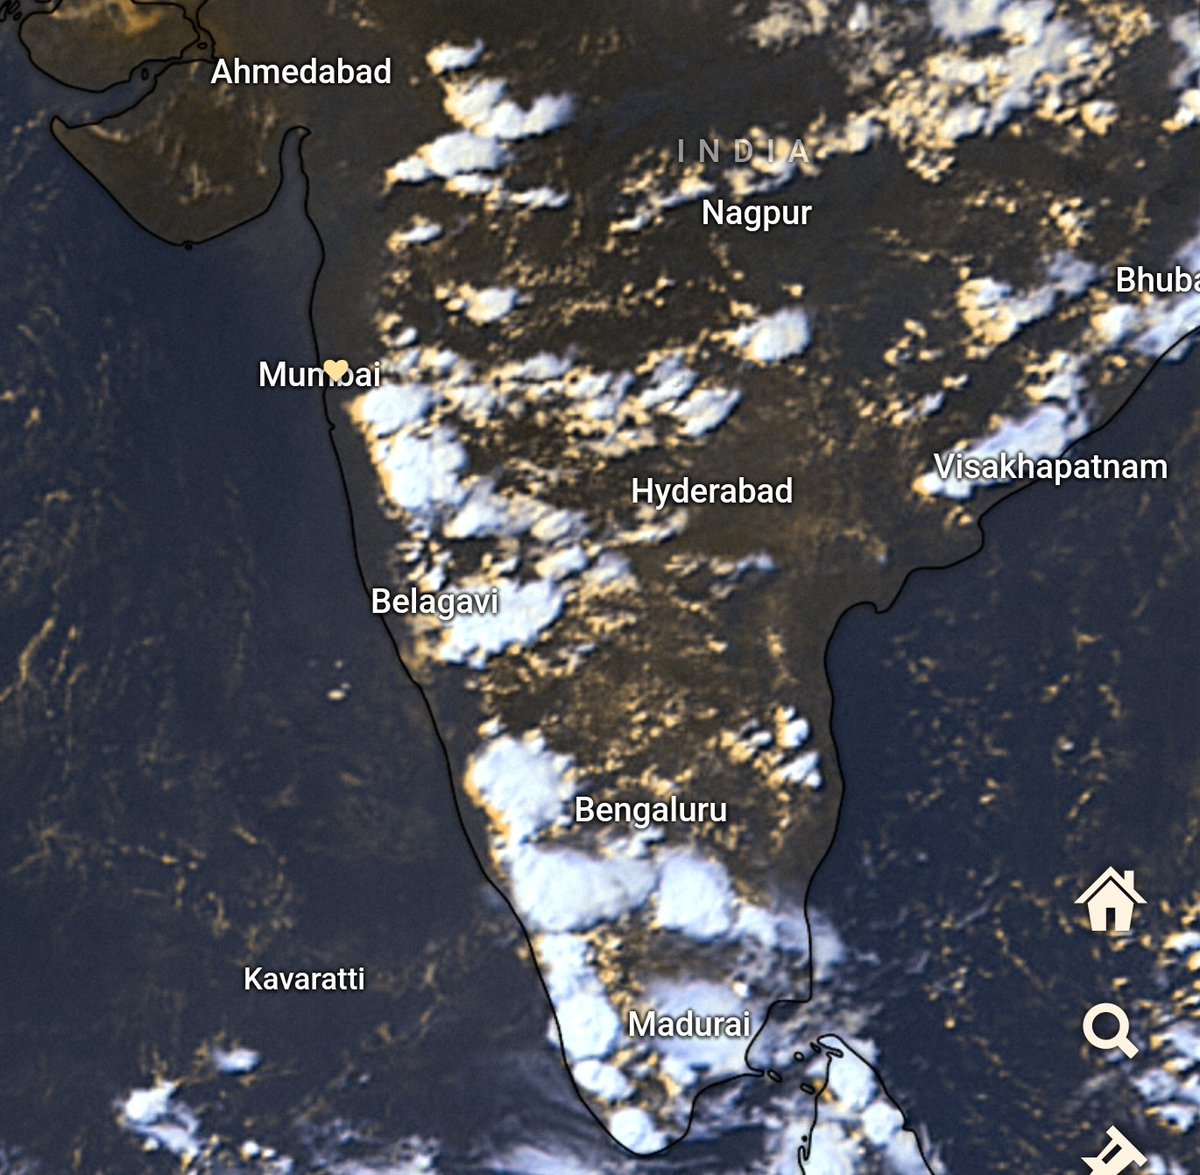 Lovely Sat image 😍
Western #ghats all fired up with #PreMonsoon ⛈️⛈️ from southern tip of #Kerala all the way to N #Maharashtra! 

#Pune missing by very small margin today. #Satara & #Lavasa region west of Pune seeing intense TS currently.

#Lonavala next in line, with a chance